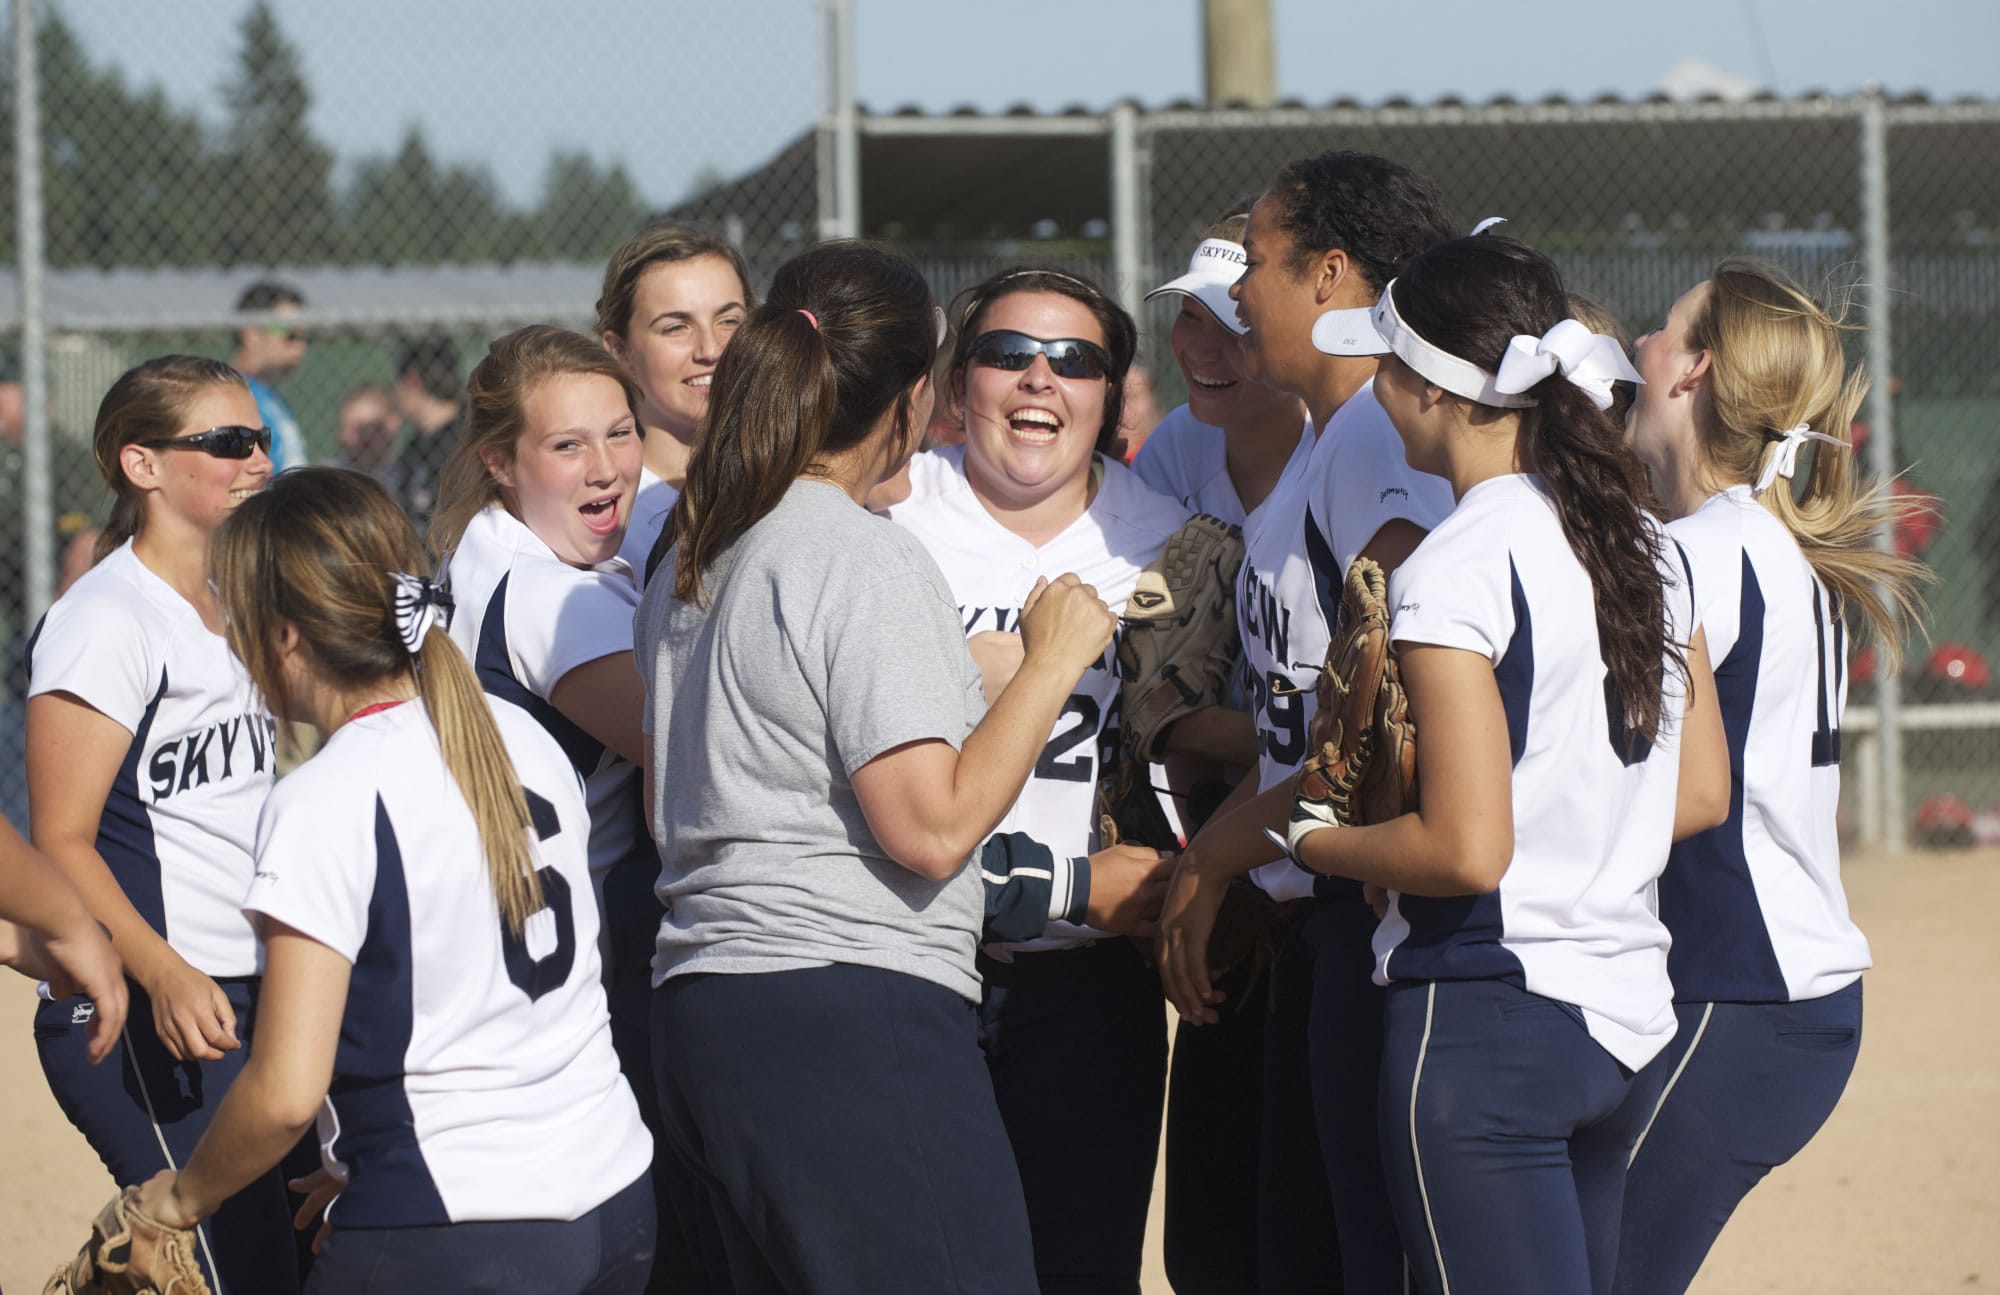 Skyview celebrates after beating Camas to win the 4A District Softball Championship, Tuesday, May 14, 2013.